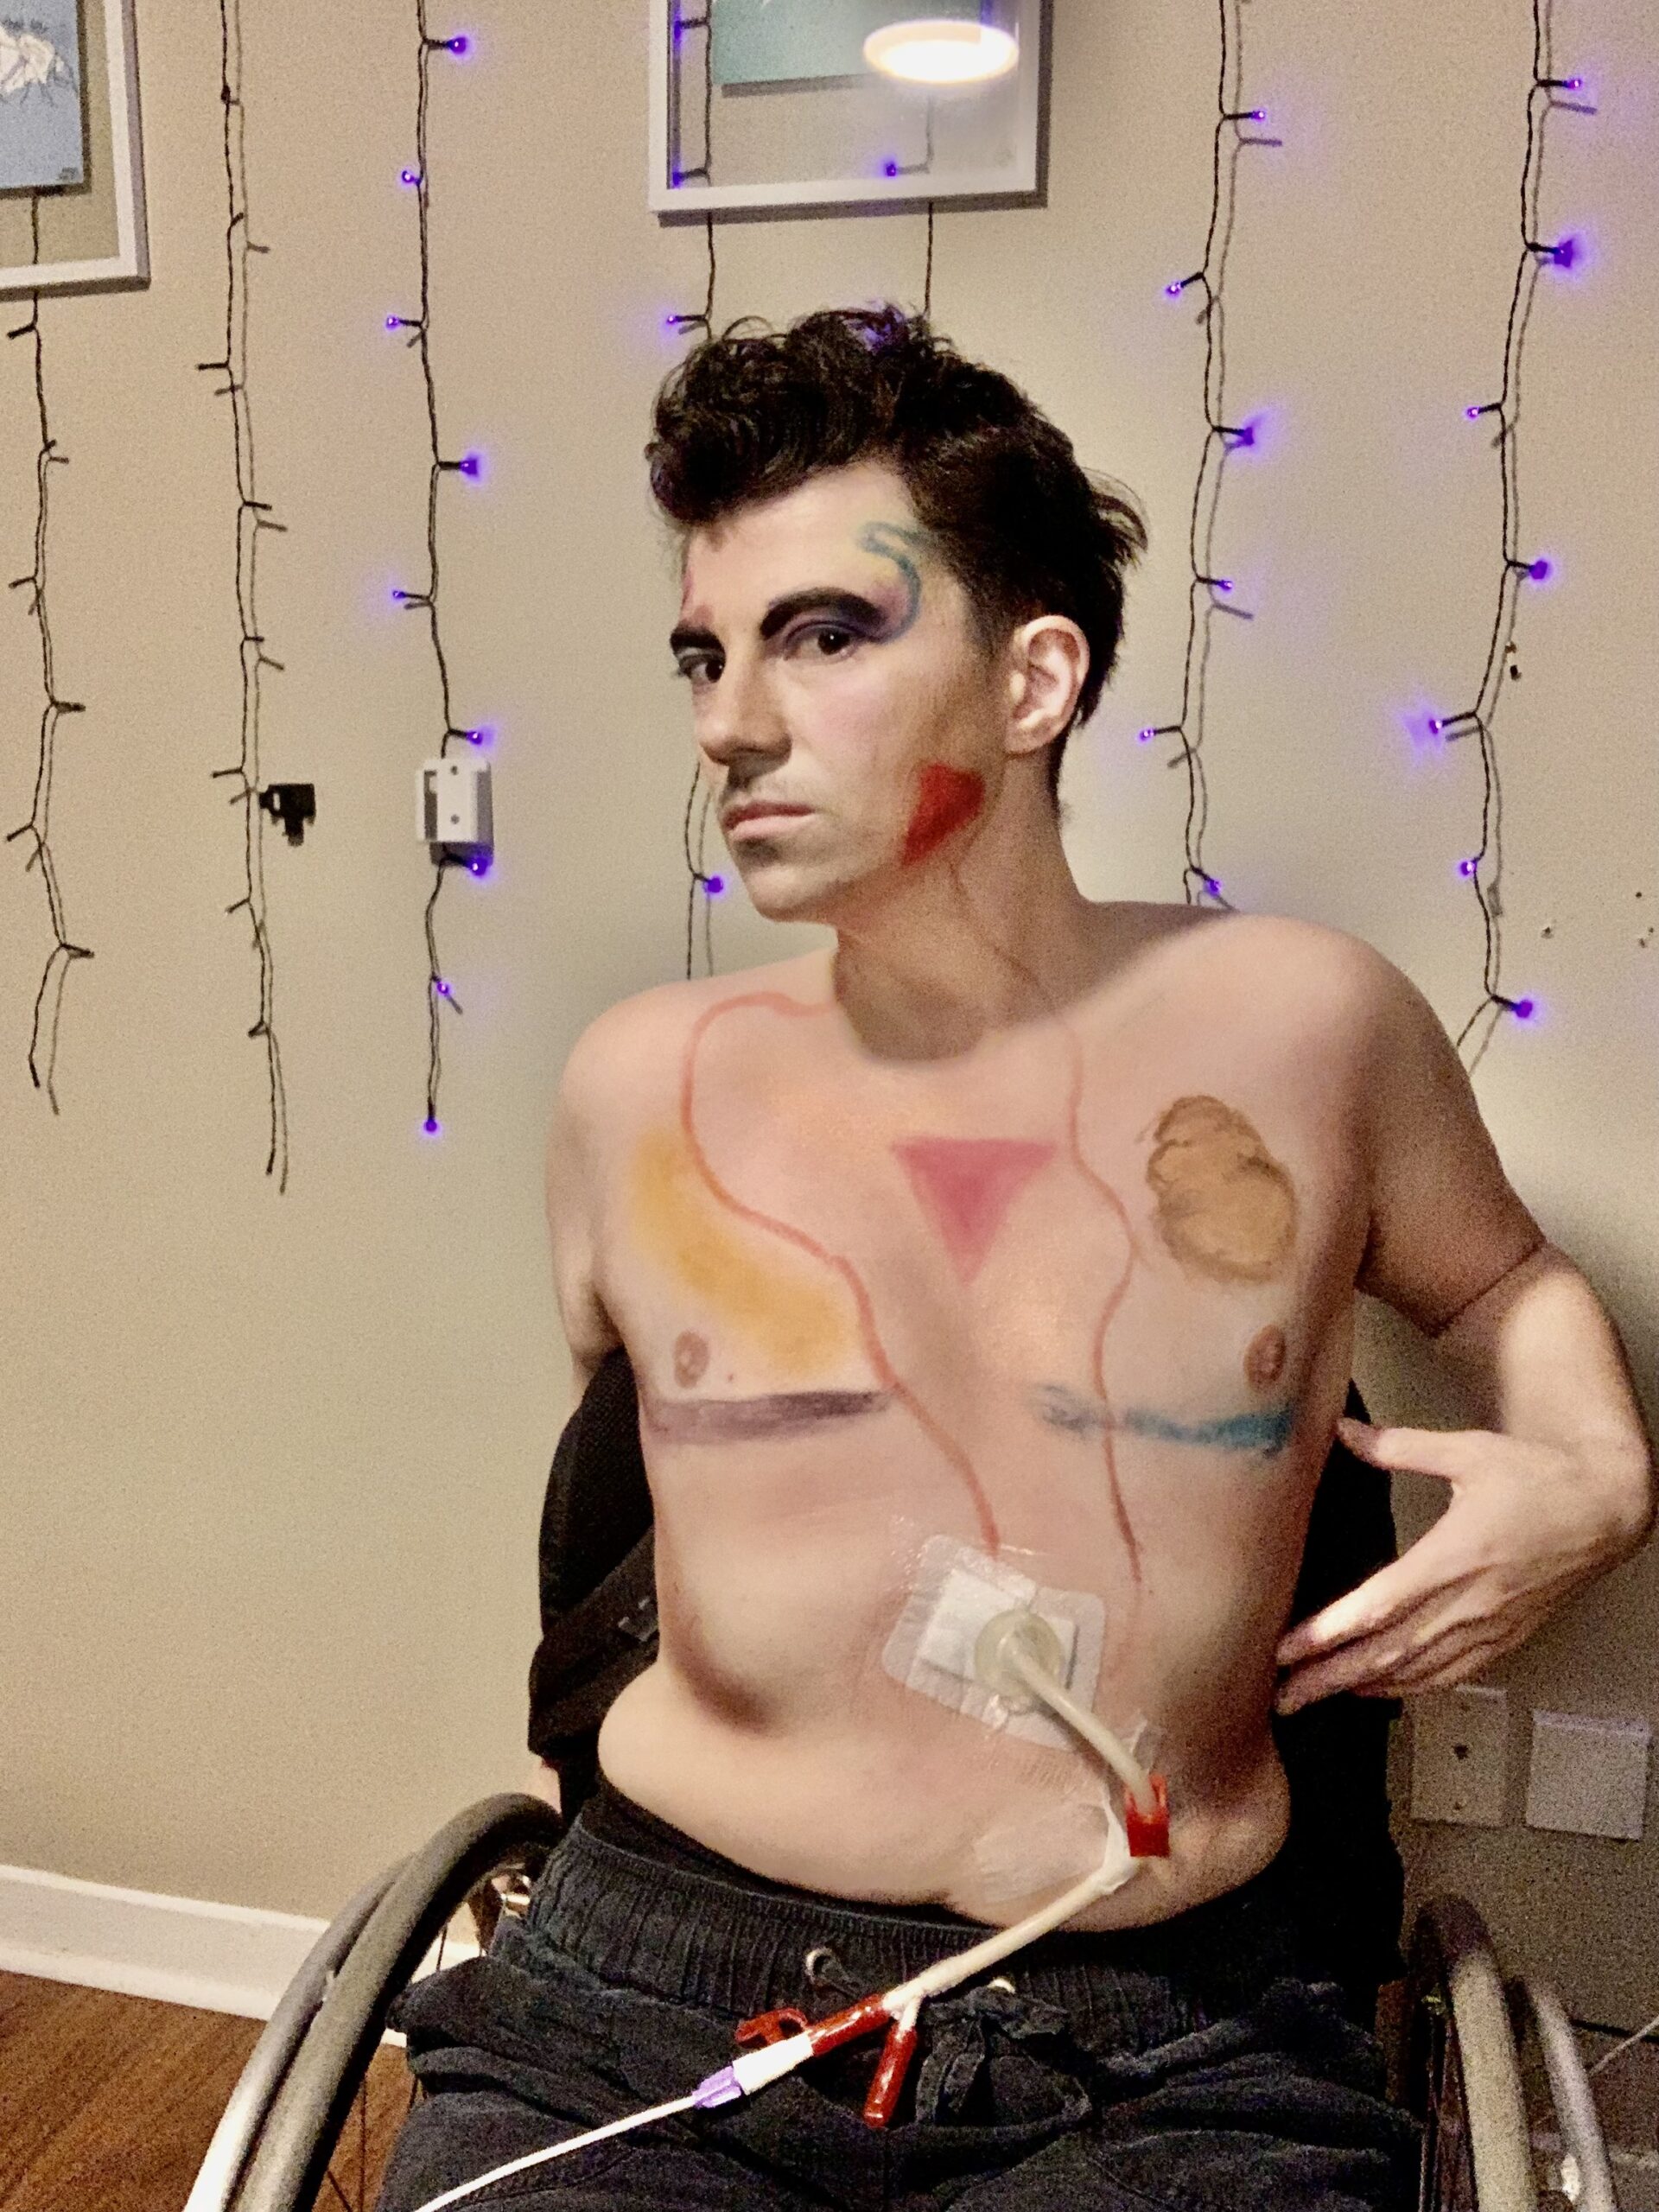 Gabe, Entro-pee, is a white trans masculine person with short brown curly hair using a manual wheelchair. Their top surgery scars visible are highlighted with purple and blue lines. They have a large gastric tube coming from their midline that is connected to smaller line behind them in a backpack for feeding them. On their face , the makeup highlights a small moustache and red triangles on both cheeks with golden highlighting. Their eyes have purple and blue eyeliners in each eye with purple and blue eyeshadows on the eyes with the other colour. The eyeliner twists upwards into tube like shapes to represents the tubes inside and outside of their body. The red triangles on their face is traces downward in swirling lines towards the gastric tubes that feed them. They have a inverted pink triangle in the middle of their chest to represent the queer individuals who the community has lost and will continue to lose to violence. They body is shaded in different shades of golden and white glittering shadows and highlights. They have black tight pants just underneath their midline.